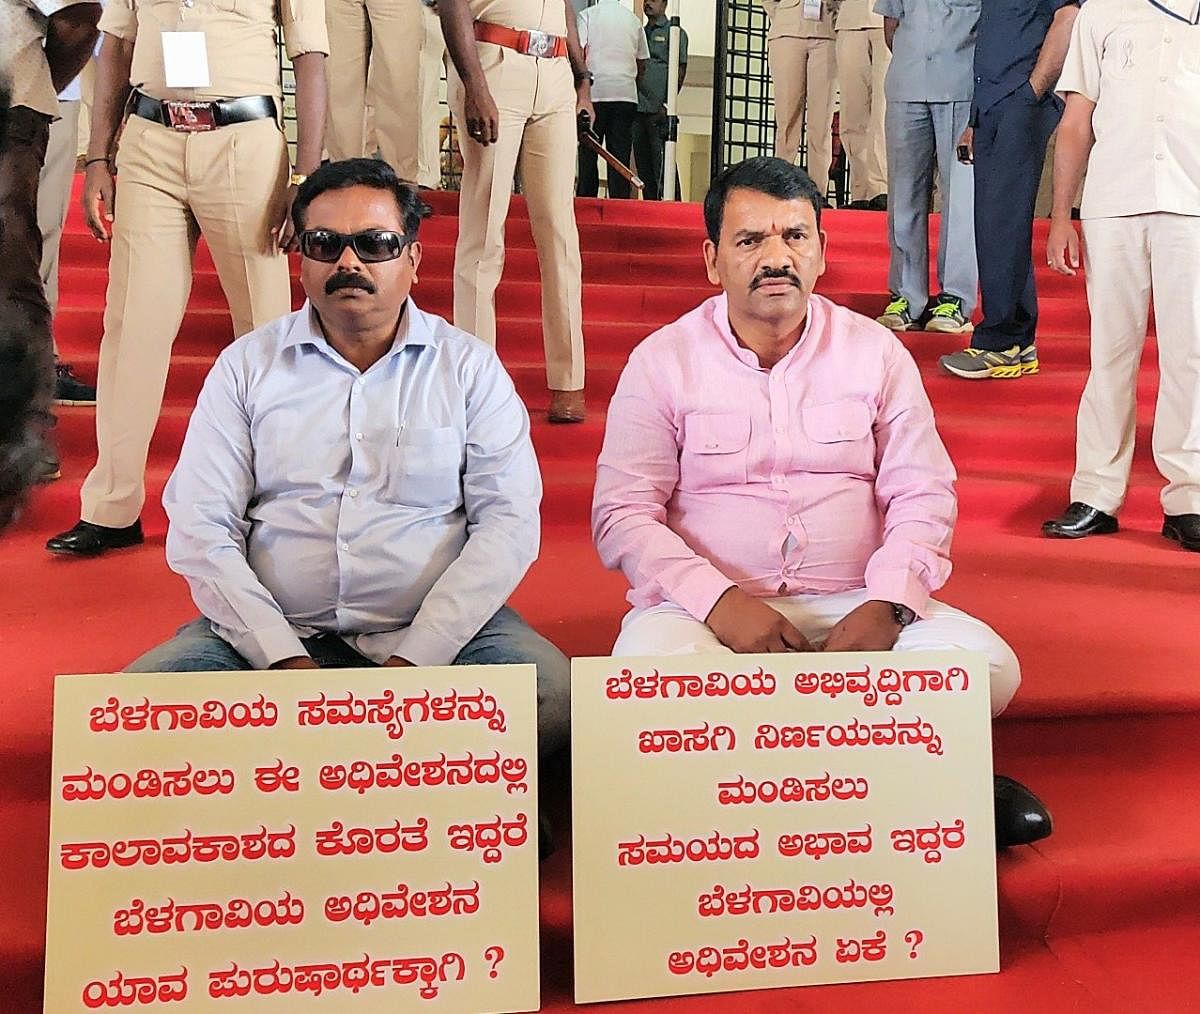 MLAs Abhay Patil and Anil Benke staging sit-in protests at the entrance of SVS in Belagavi for the former not being allowed to table private members bill for taking up Belagavi issues in the house. DH Photo.